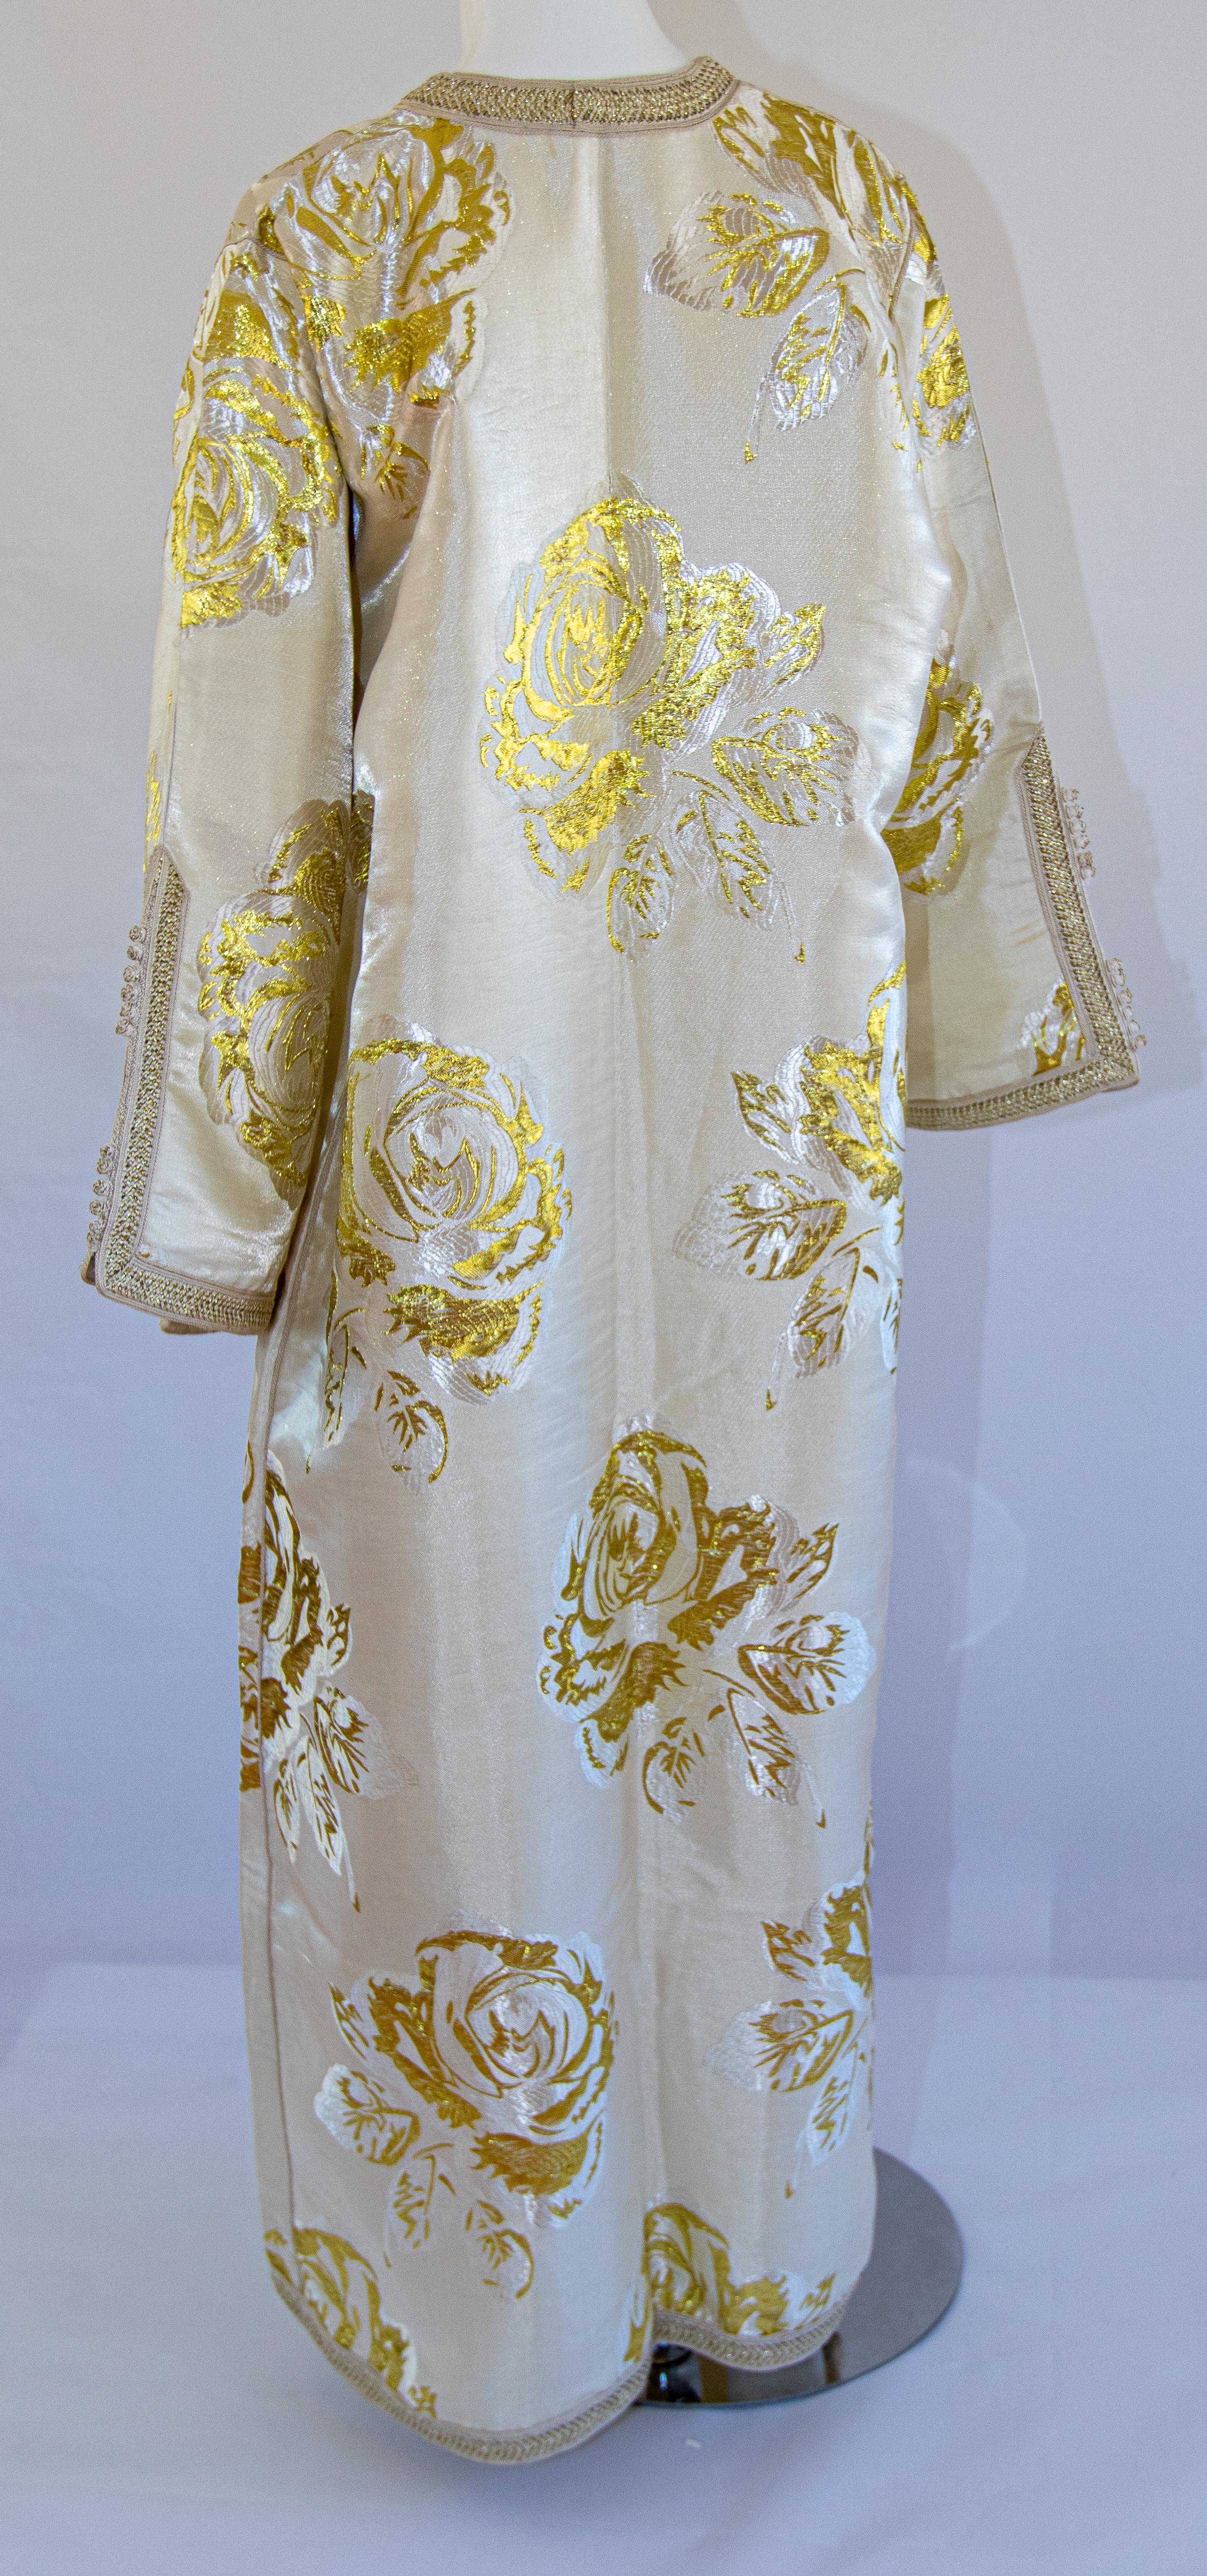 Vintage Moroccan Caftan White and Gold Metallic Floral Brocade For Sale 9